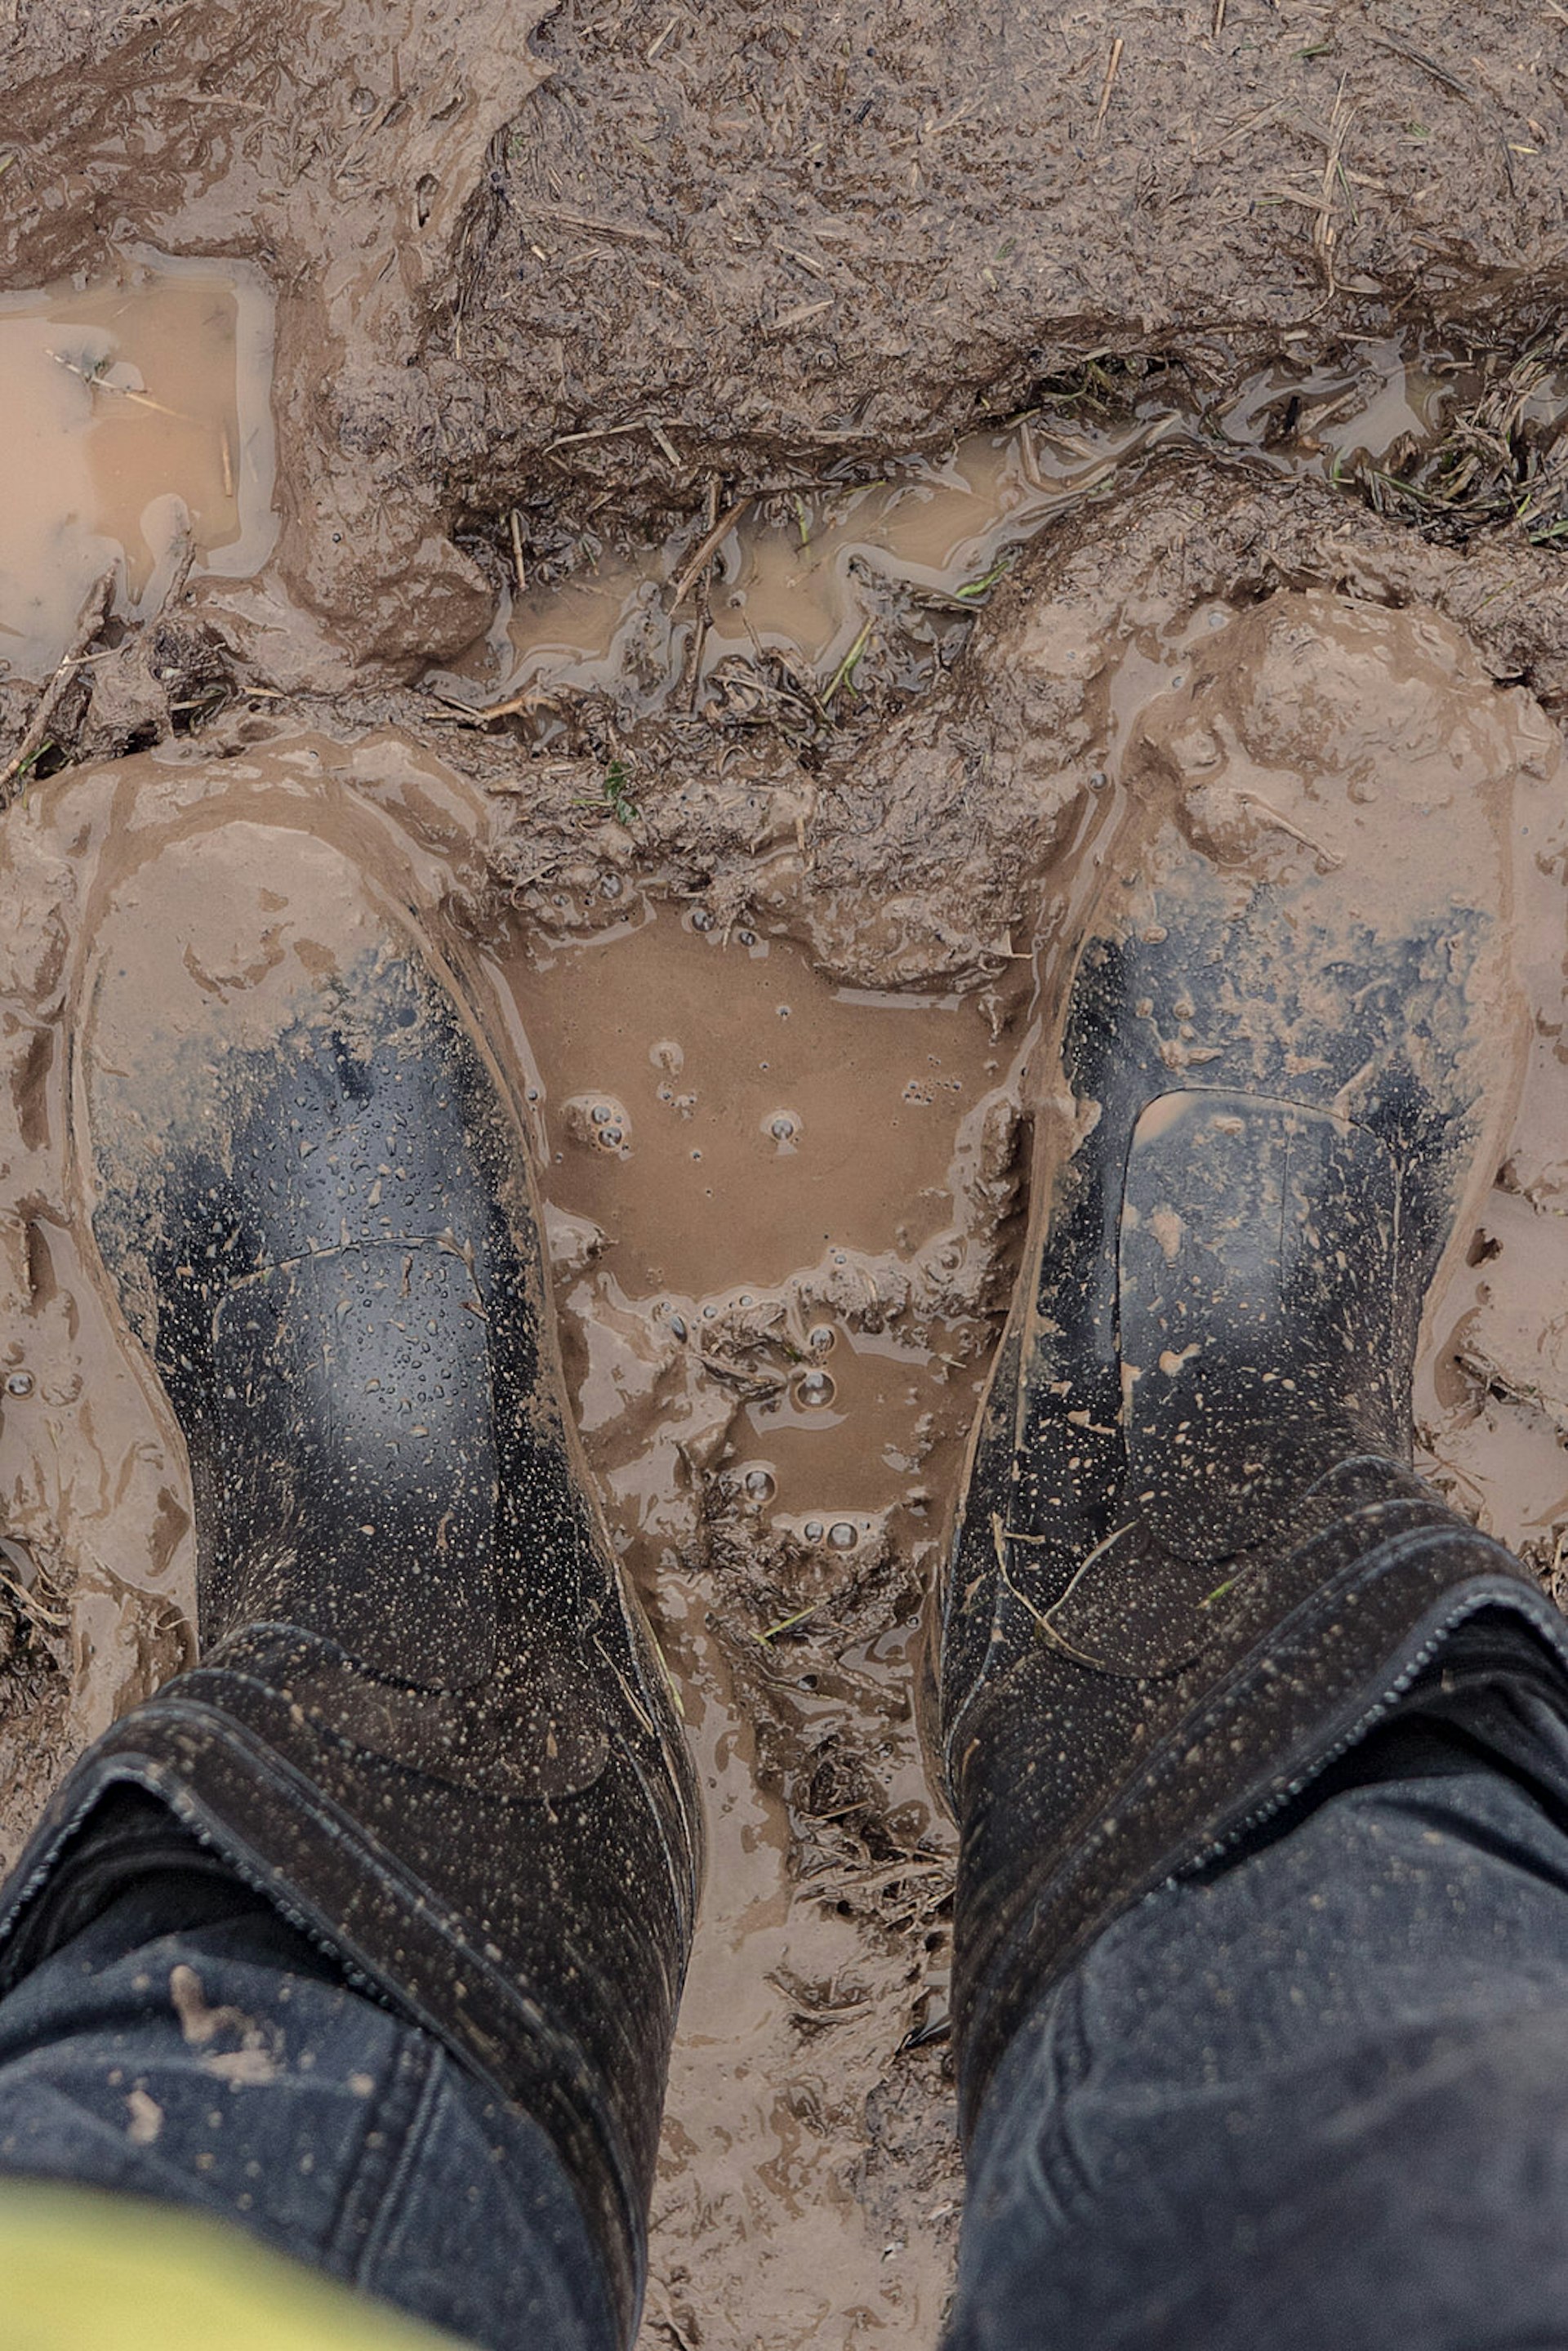 POV shot of a pair of wellington boots in mud © Dmitri Fedorov / Shutterstock